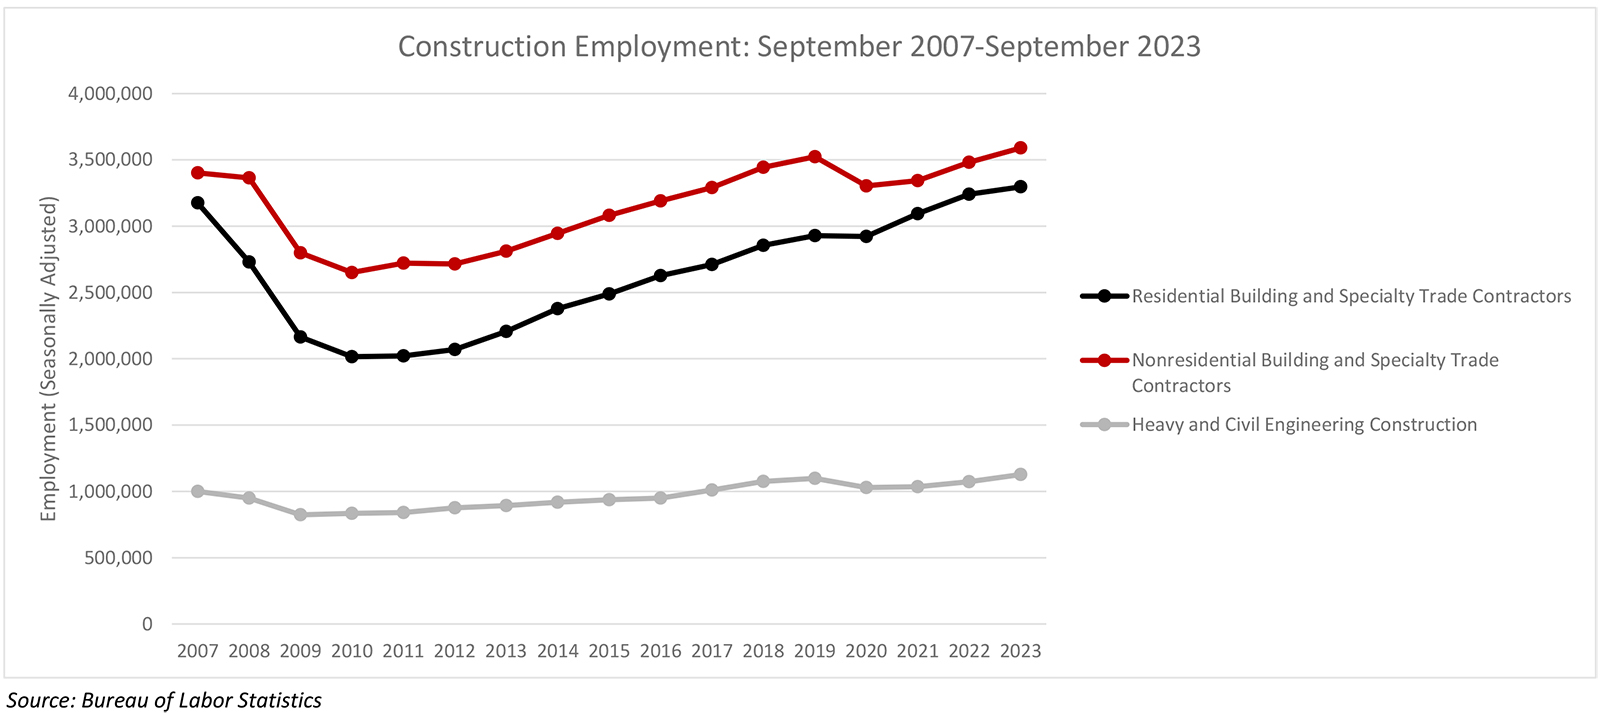 Nonresidential Construction Employment Decreases by 1,300 in September